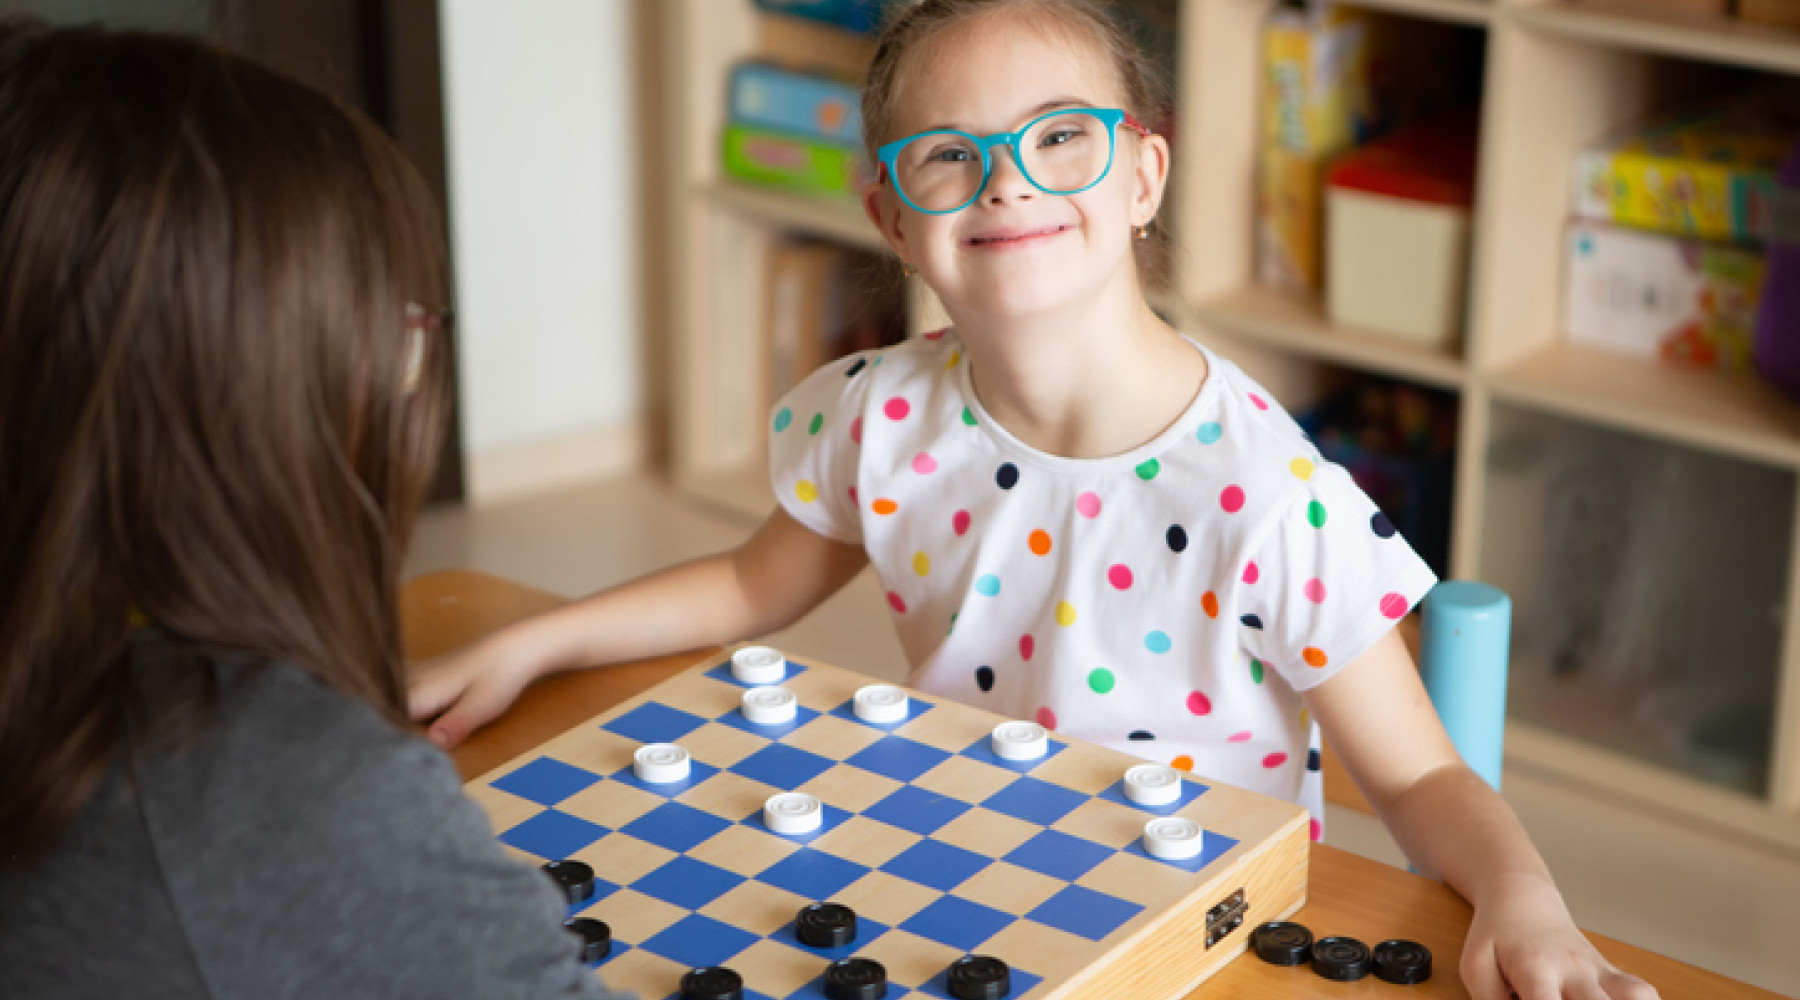 Girl with down syndrome having used the NDIS checklist playing chess with support worker